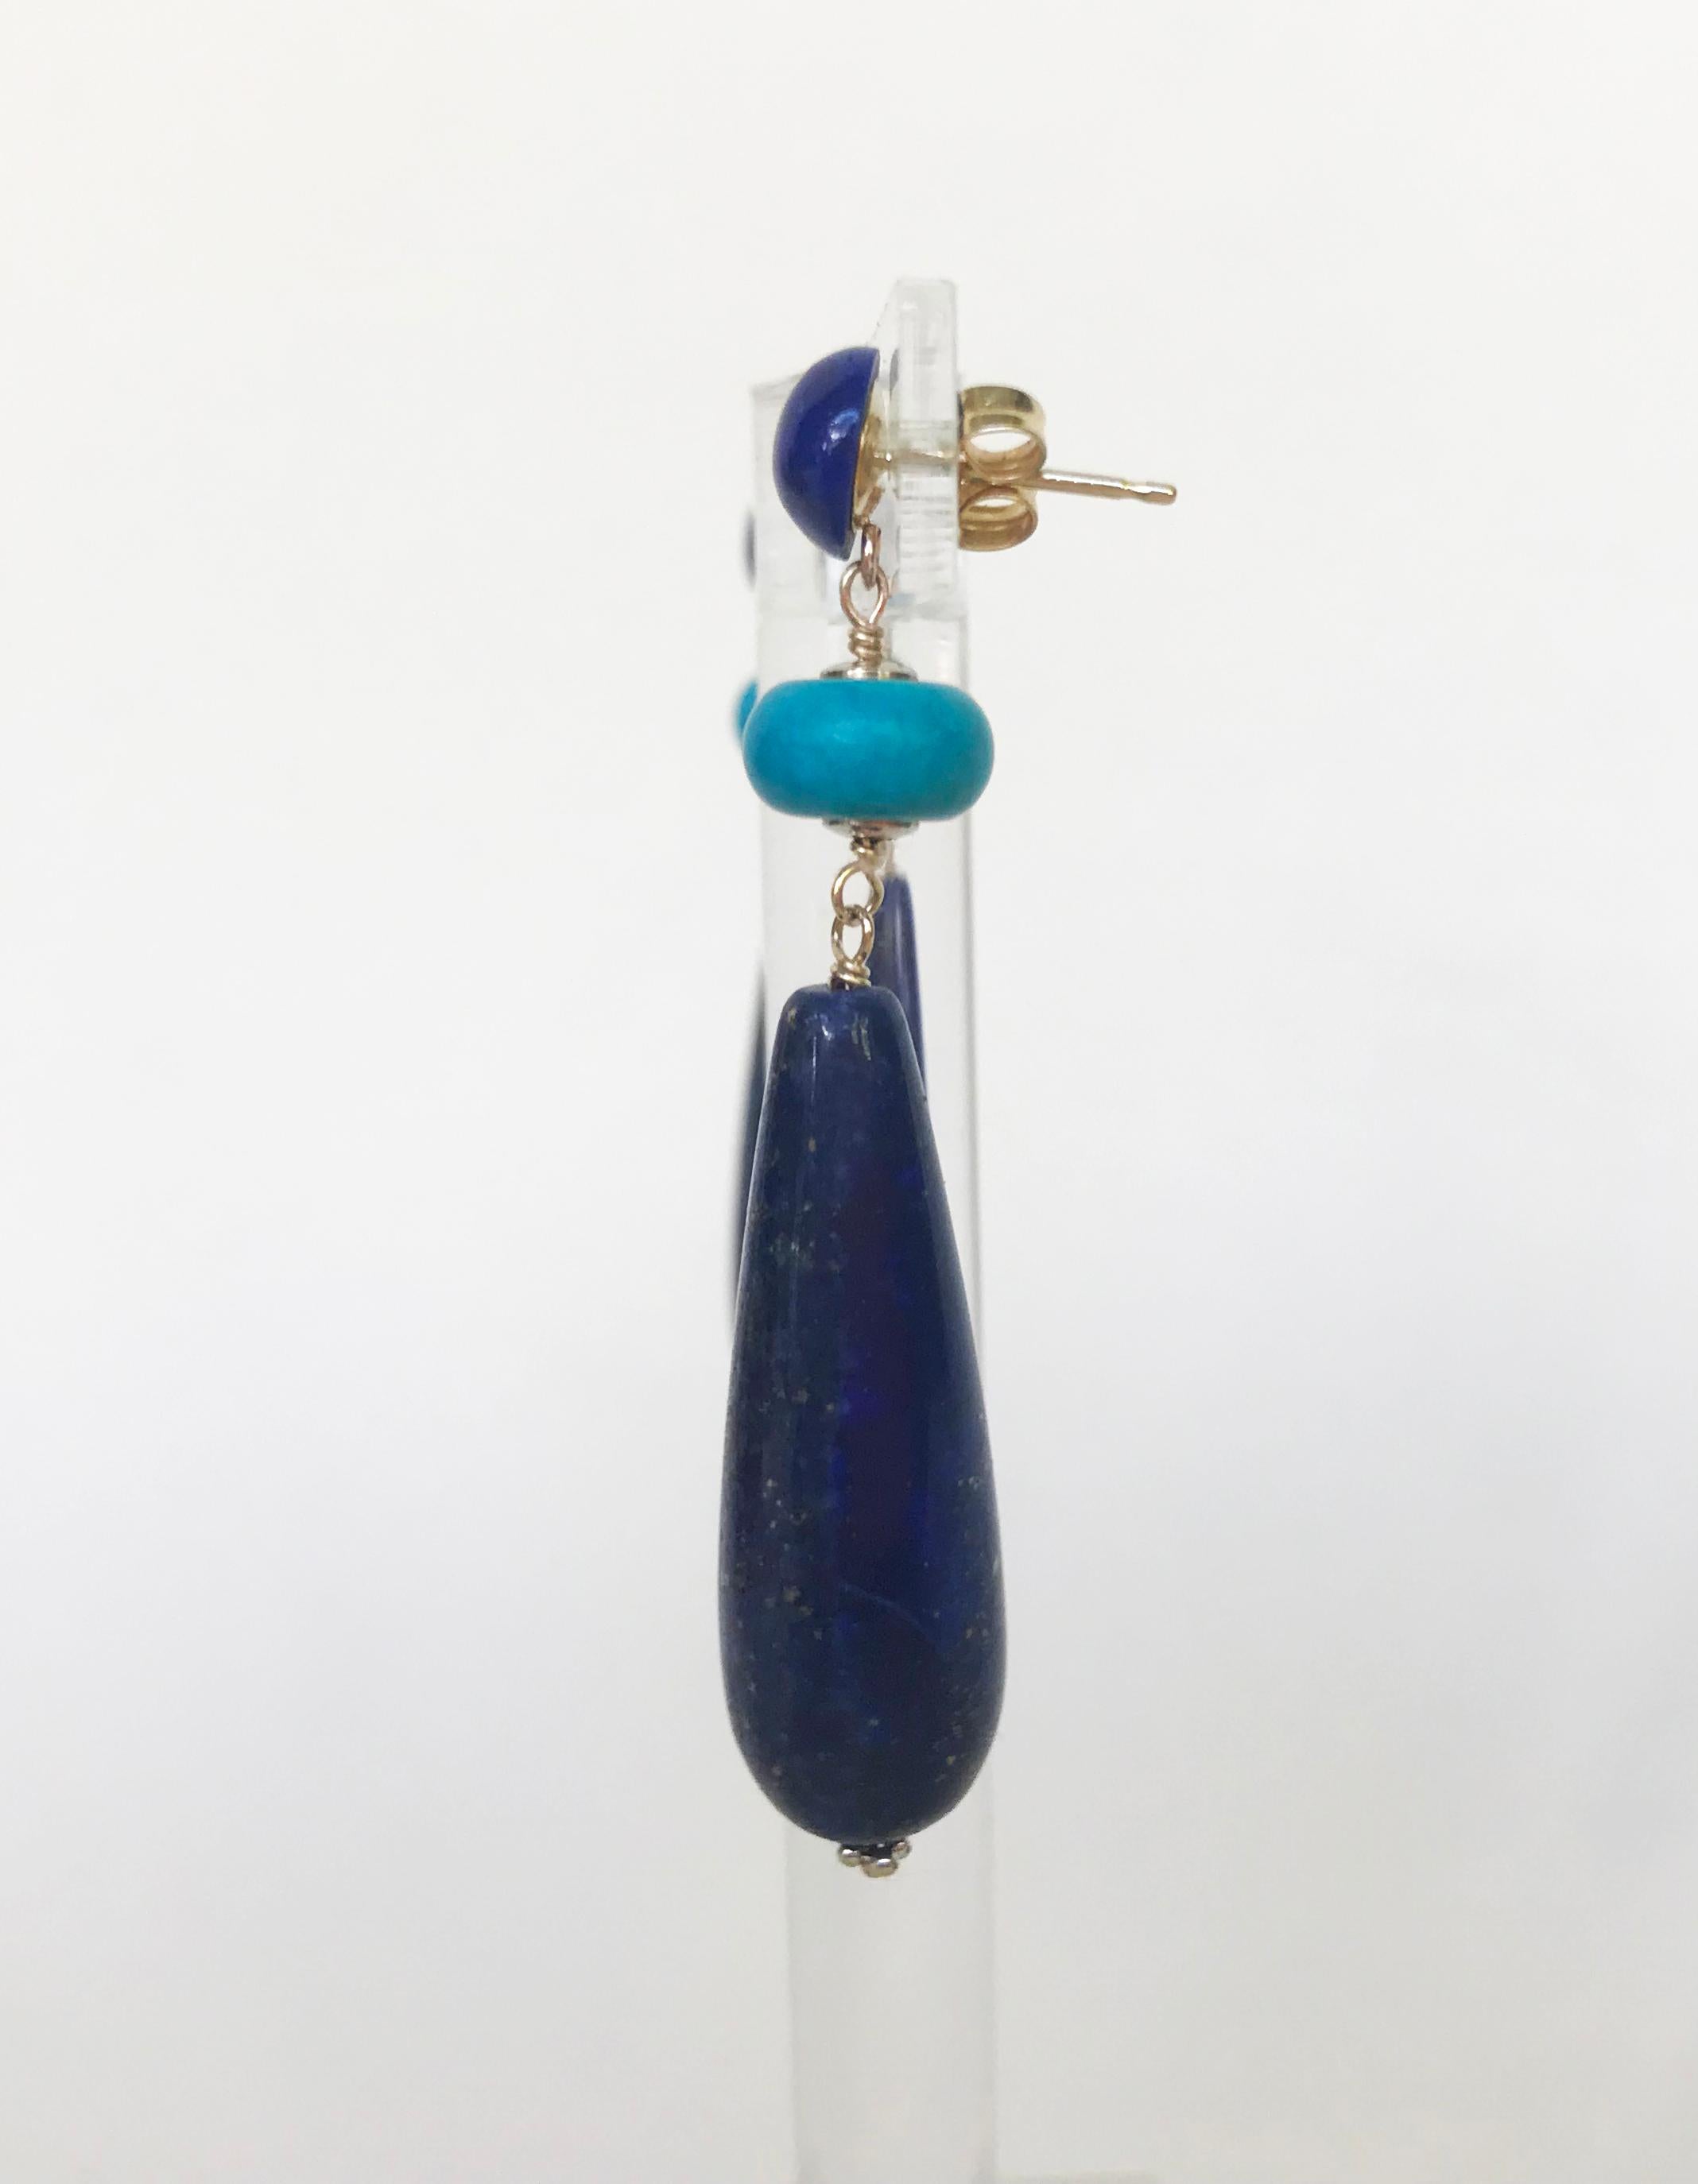 Artist Marina J Lapis Lazuli and Turquoise Earrings with 14 Karat Gold Studs and Wiring